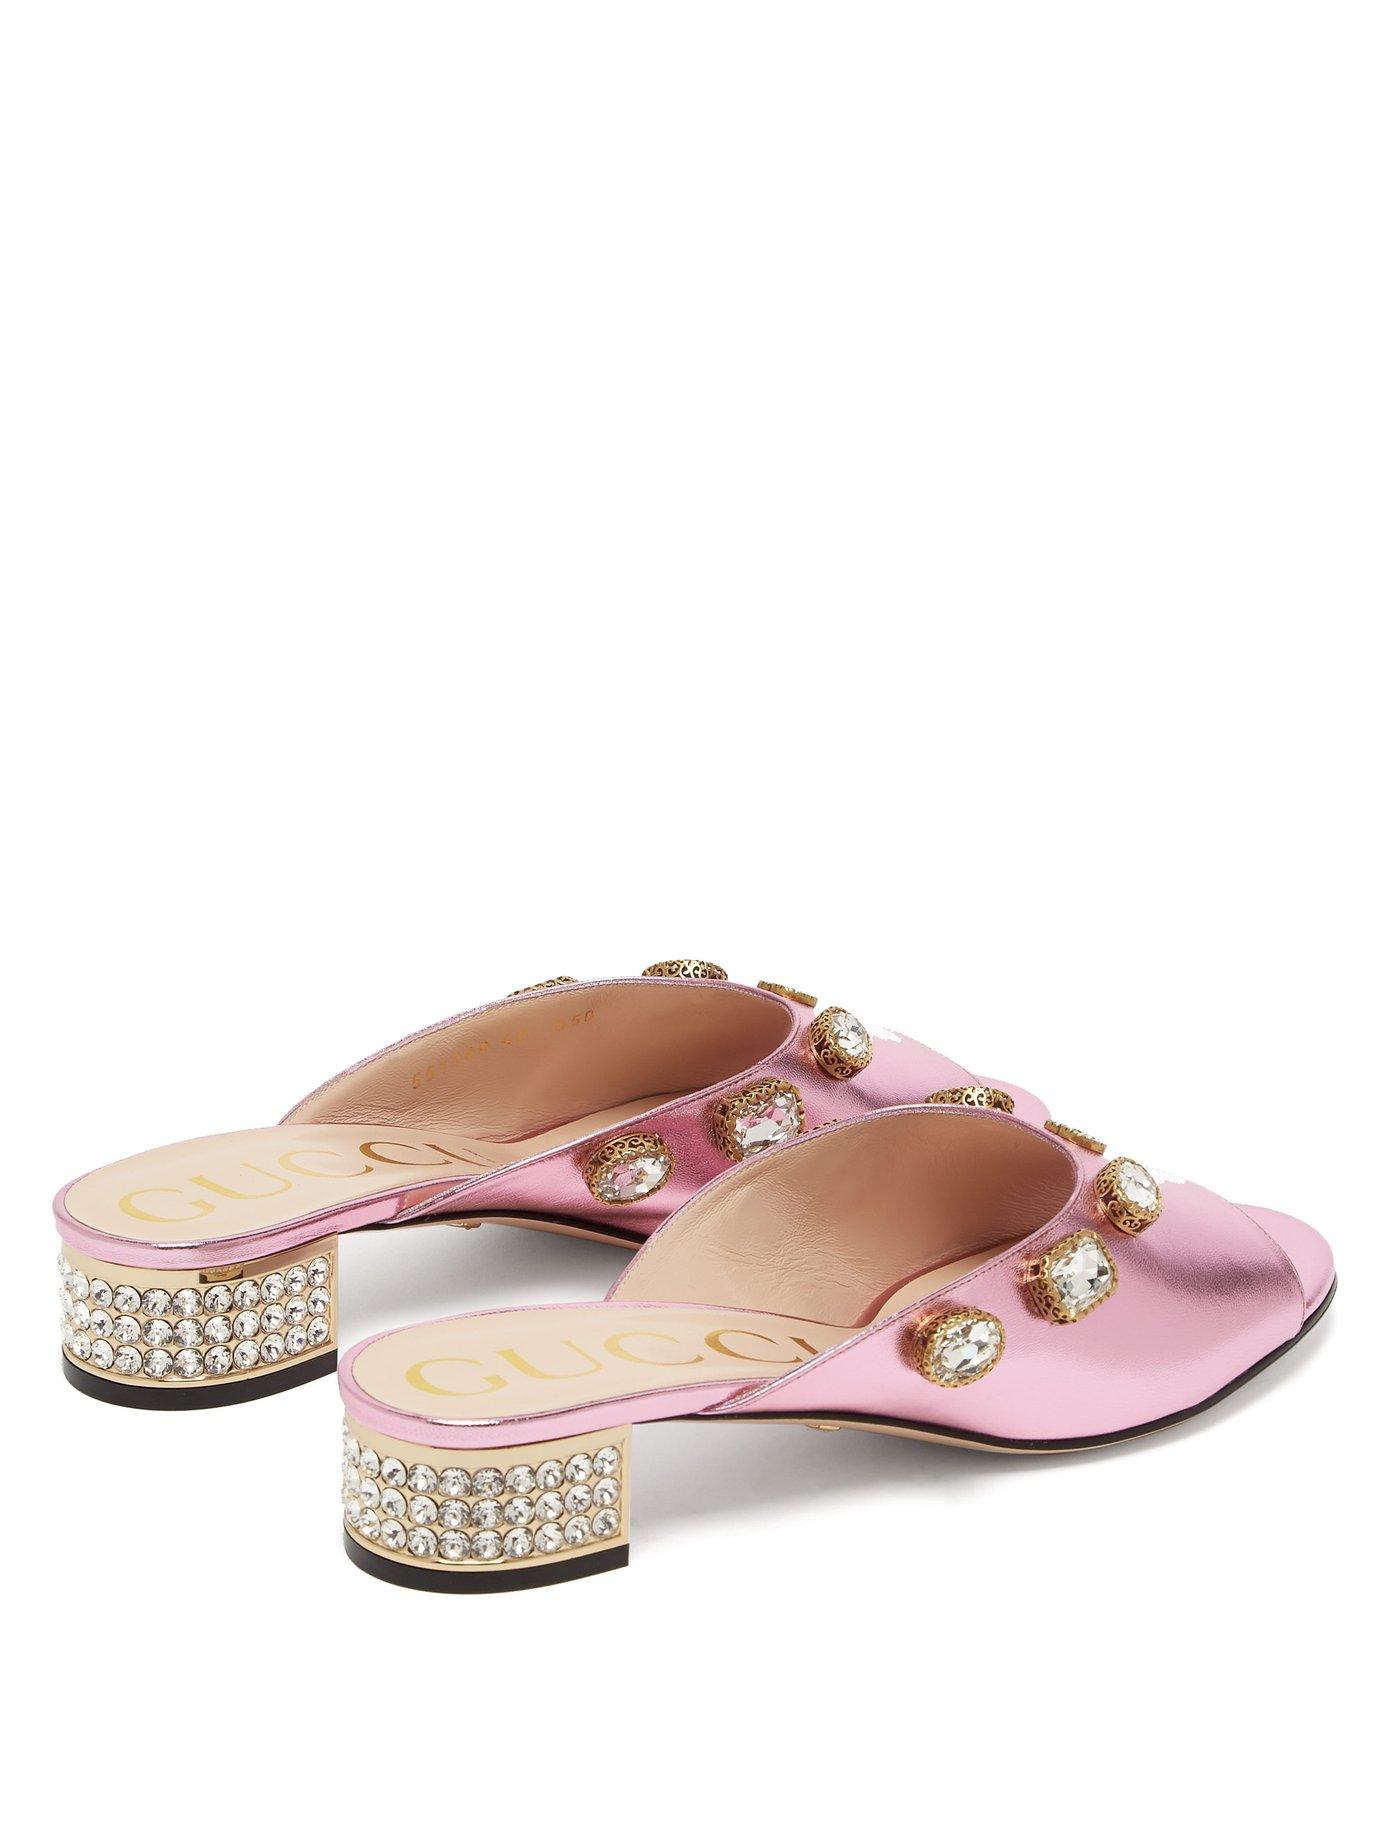 Gucci Lyric Crystal Embellished Leather Mules in Pink | Lyst